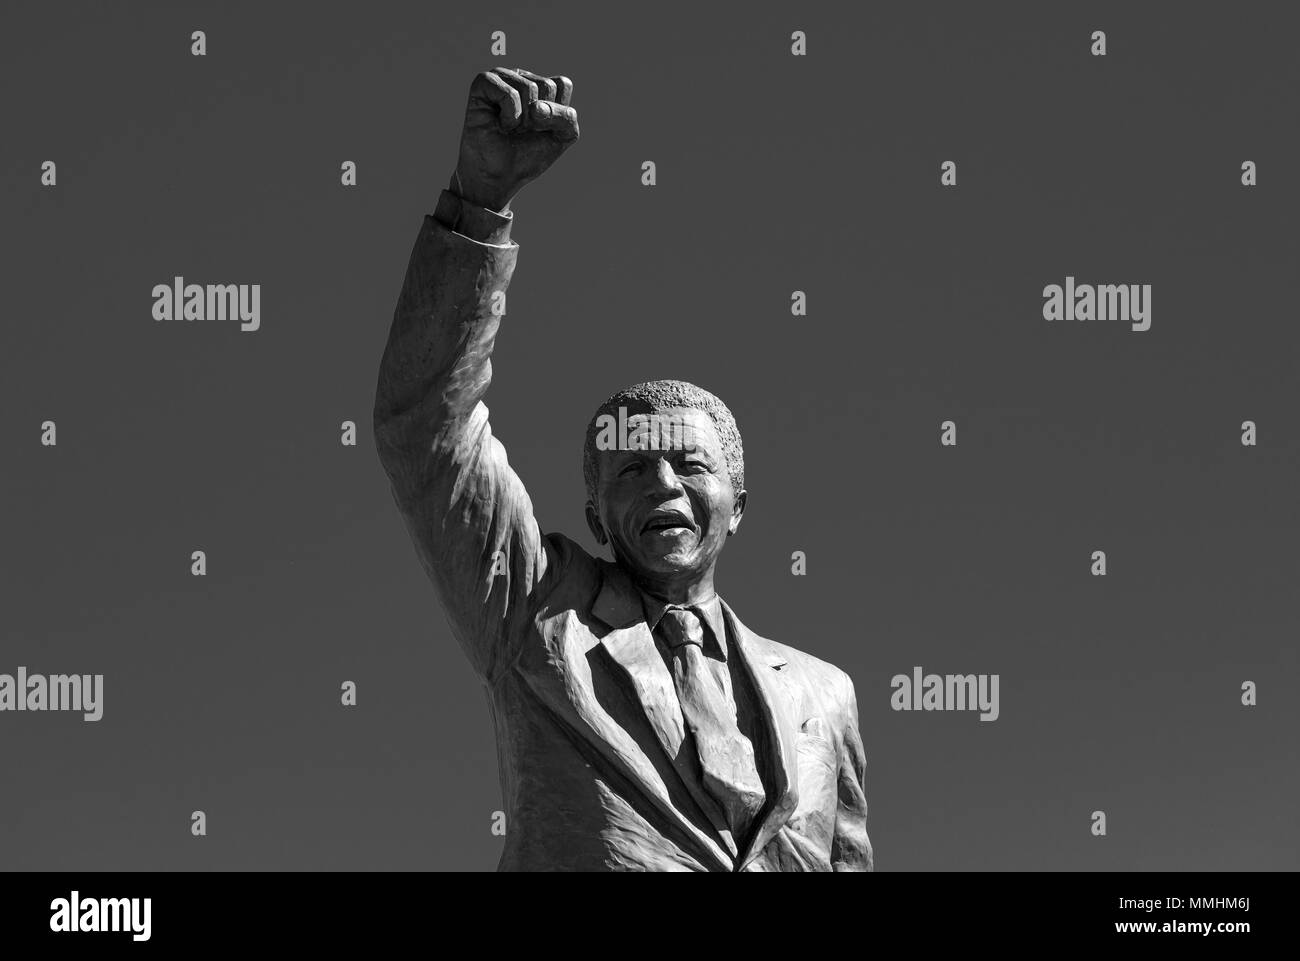 Nelson Mandela portrait statue black and white, Drakenstein Correctional Centre, Paarl, Cape Town, South Africa. Stock Photo